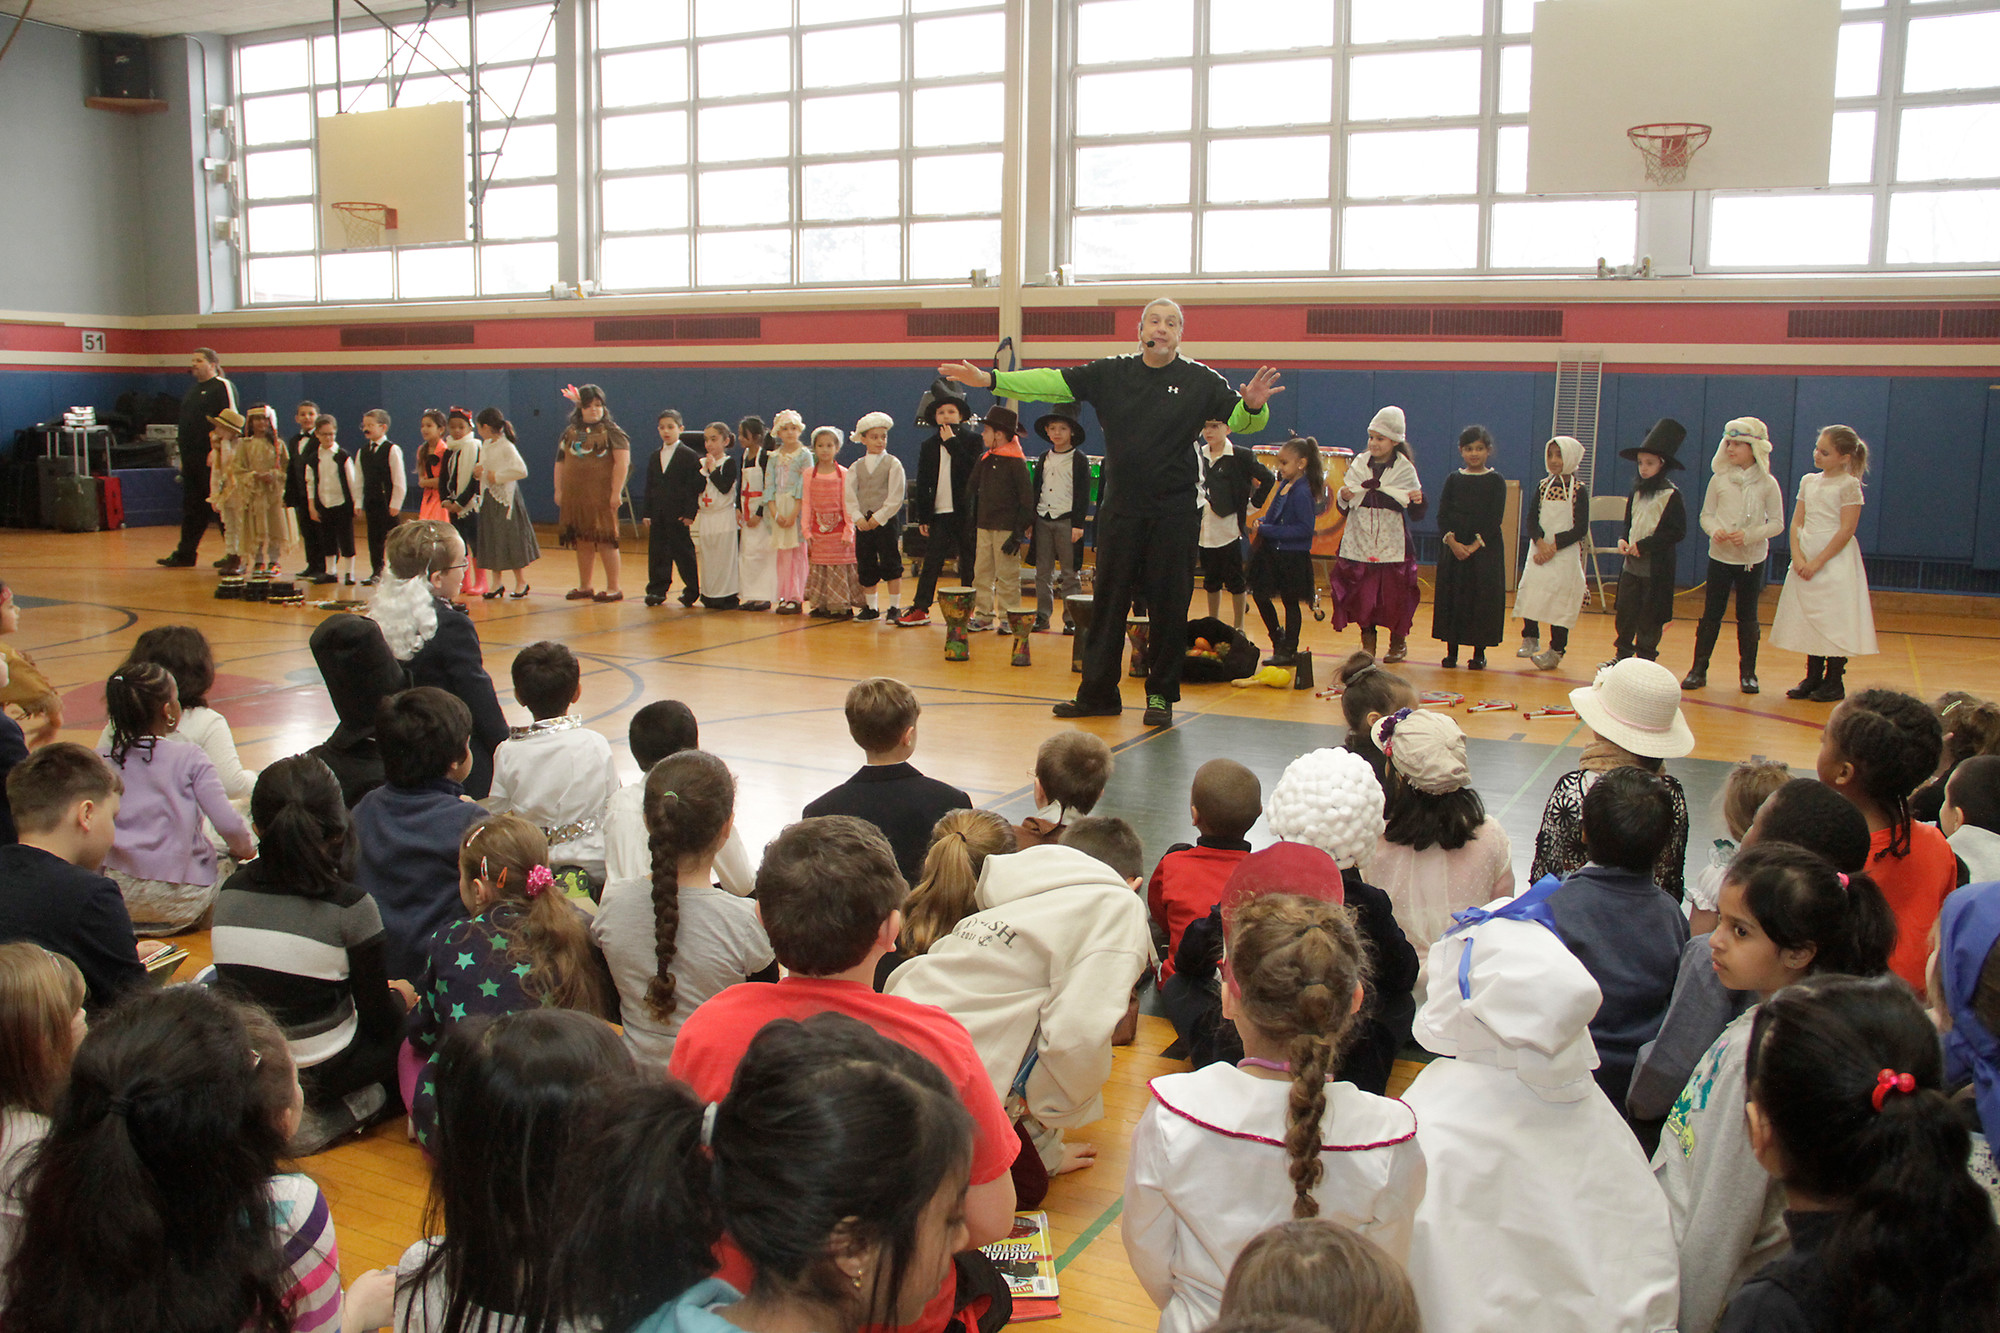 The Hip Pickles, an award-winning drumming group, entertained the students with their interactive assembly program.